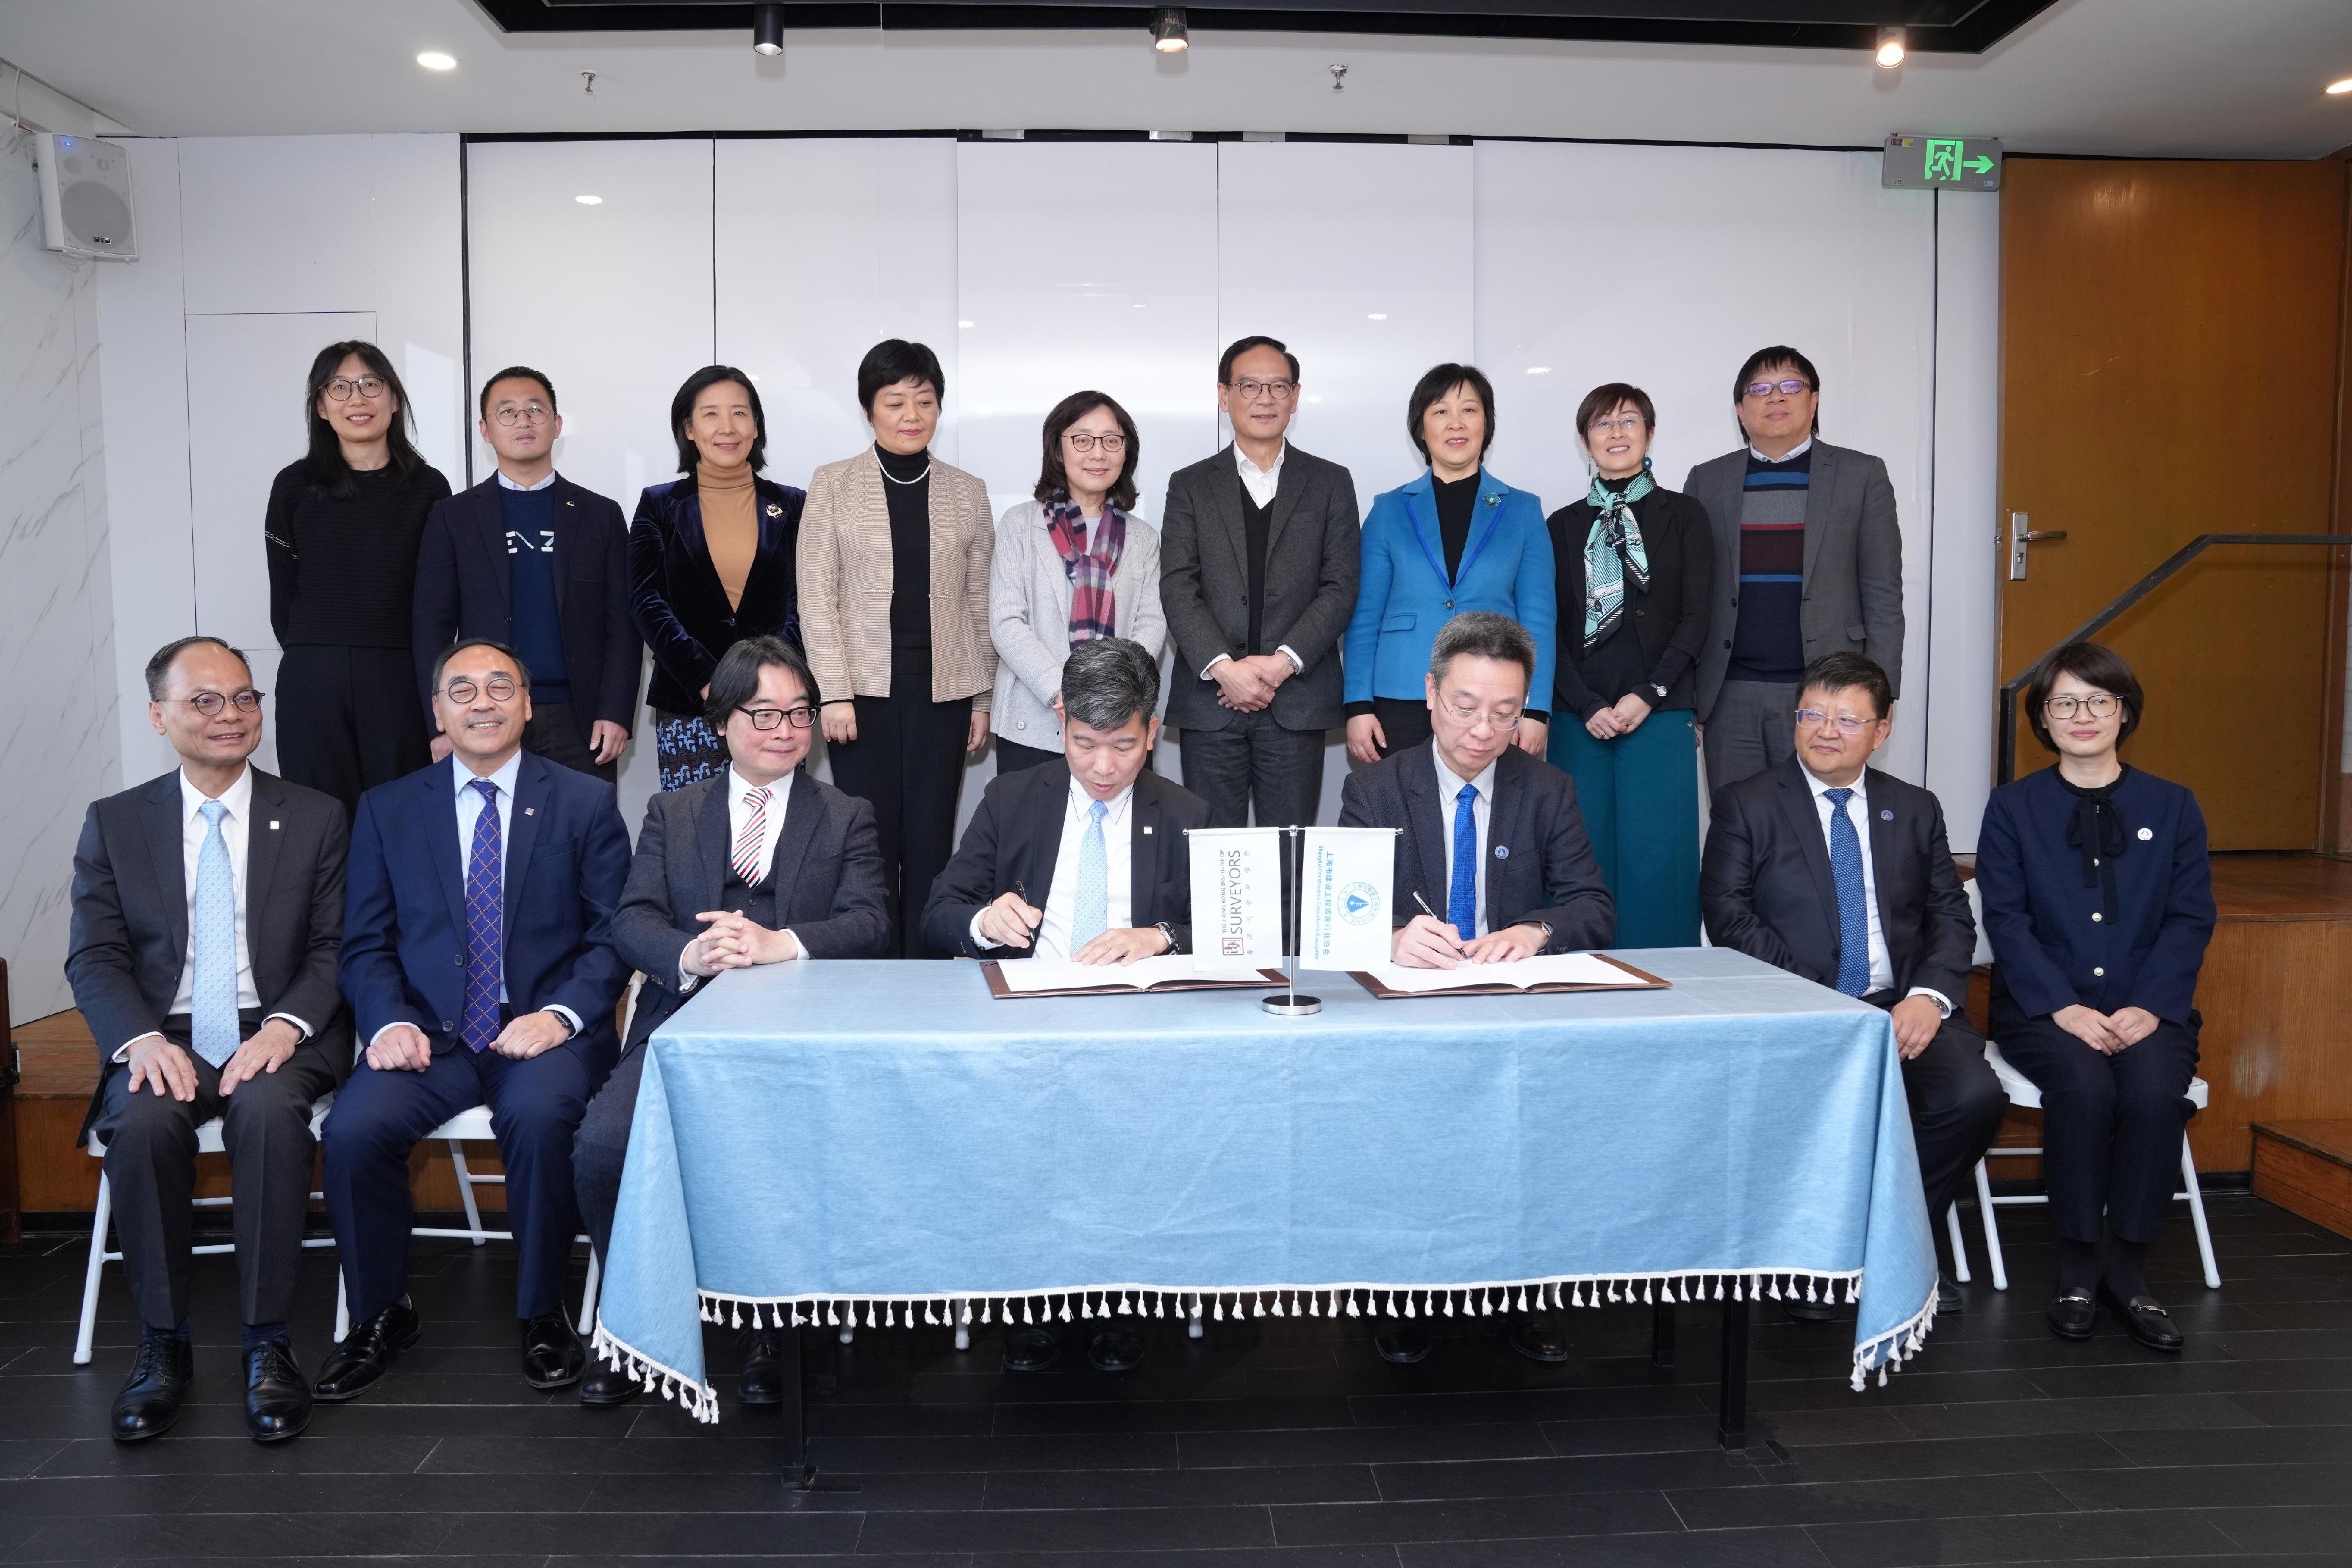 Led by the Secretary for Development, Ms Bernadette Linn, the delegation of the Development Bureau (DEVB) concluded the visit to Shanghai today  (December 21). Photo shows Ms Linn (back row, centre) attending the signing ceremony of the memorandum of co-operation between the Hong Kong Institute of Surveyors (HKIS) and the Shanghai Construction Consultants Association as well as the plaque presentation ceremony for the new liaison office of the HKIS at the Shanghai Xuhui Hong Kong Innovation and Entrepreneurship Centre.